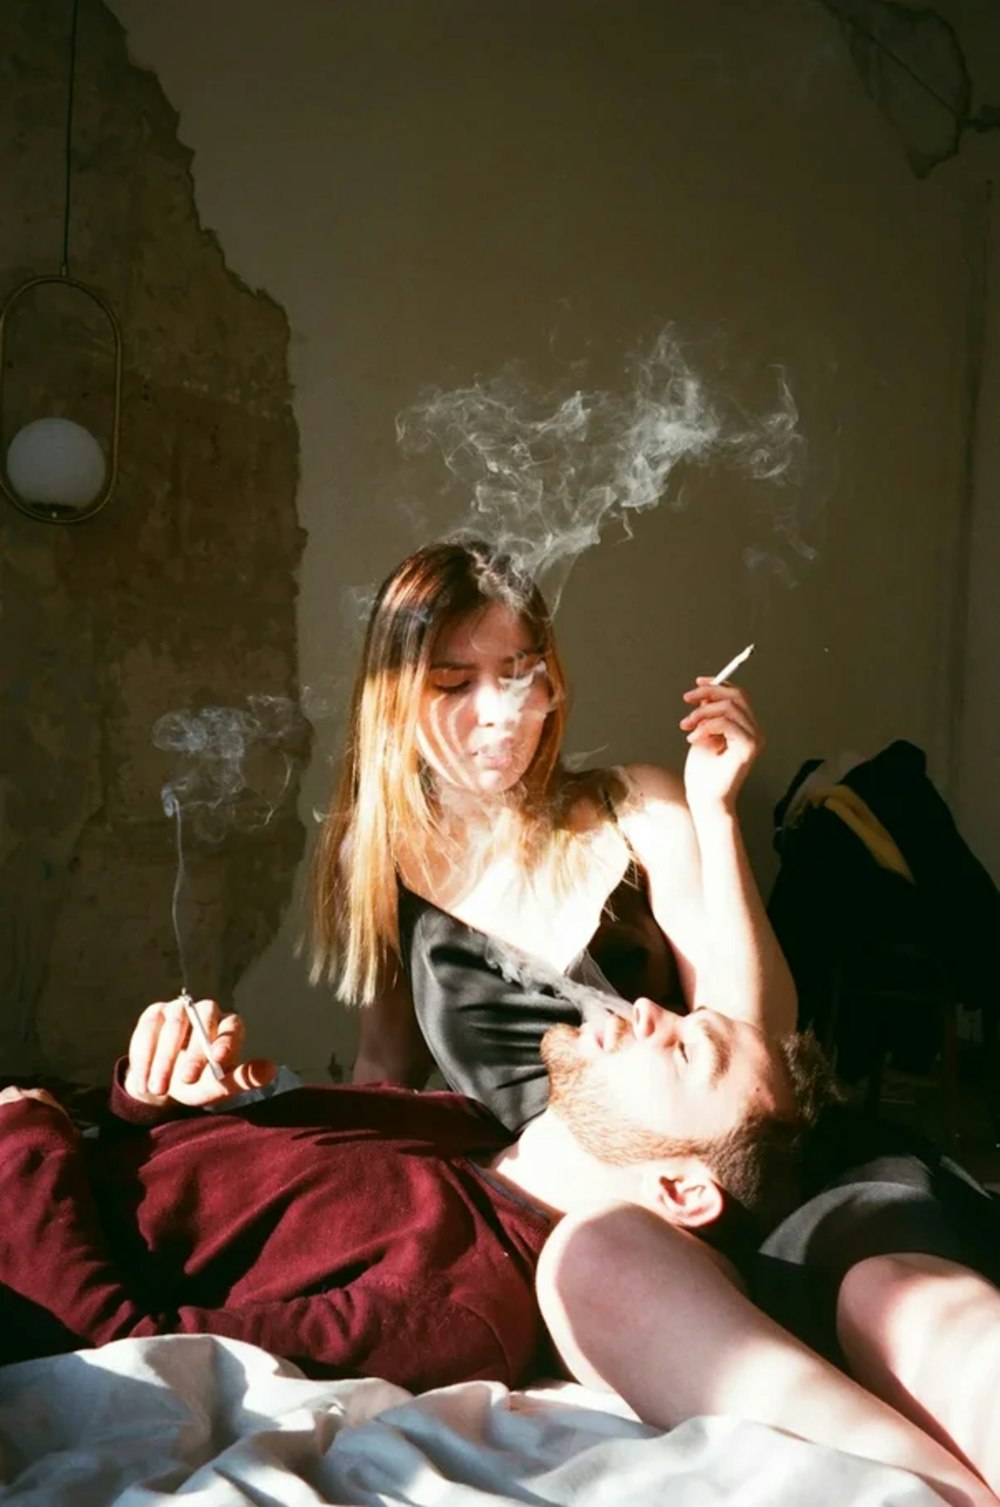 a man and a woman smoking cigarettes on a bed